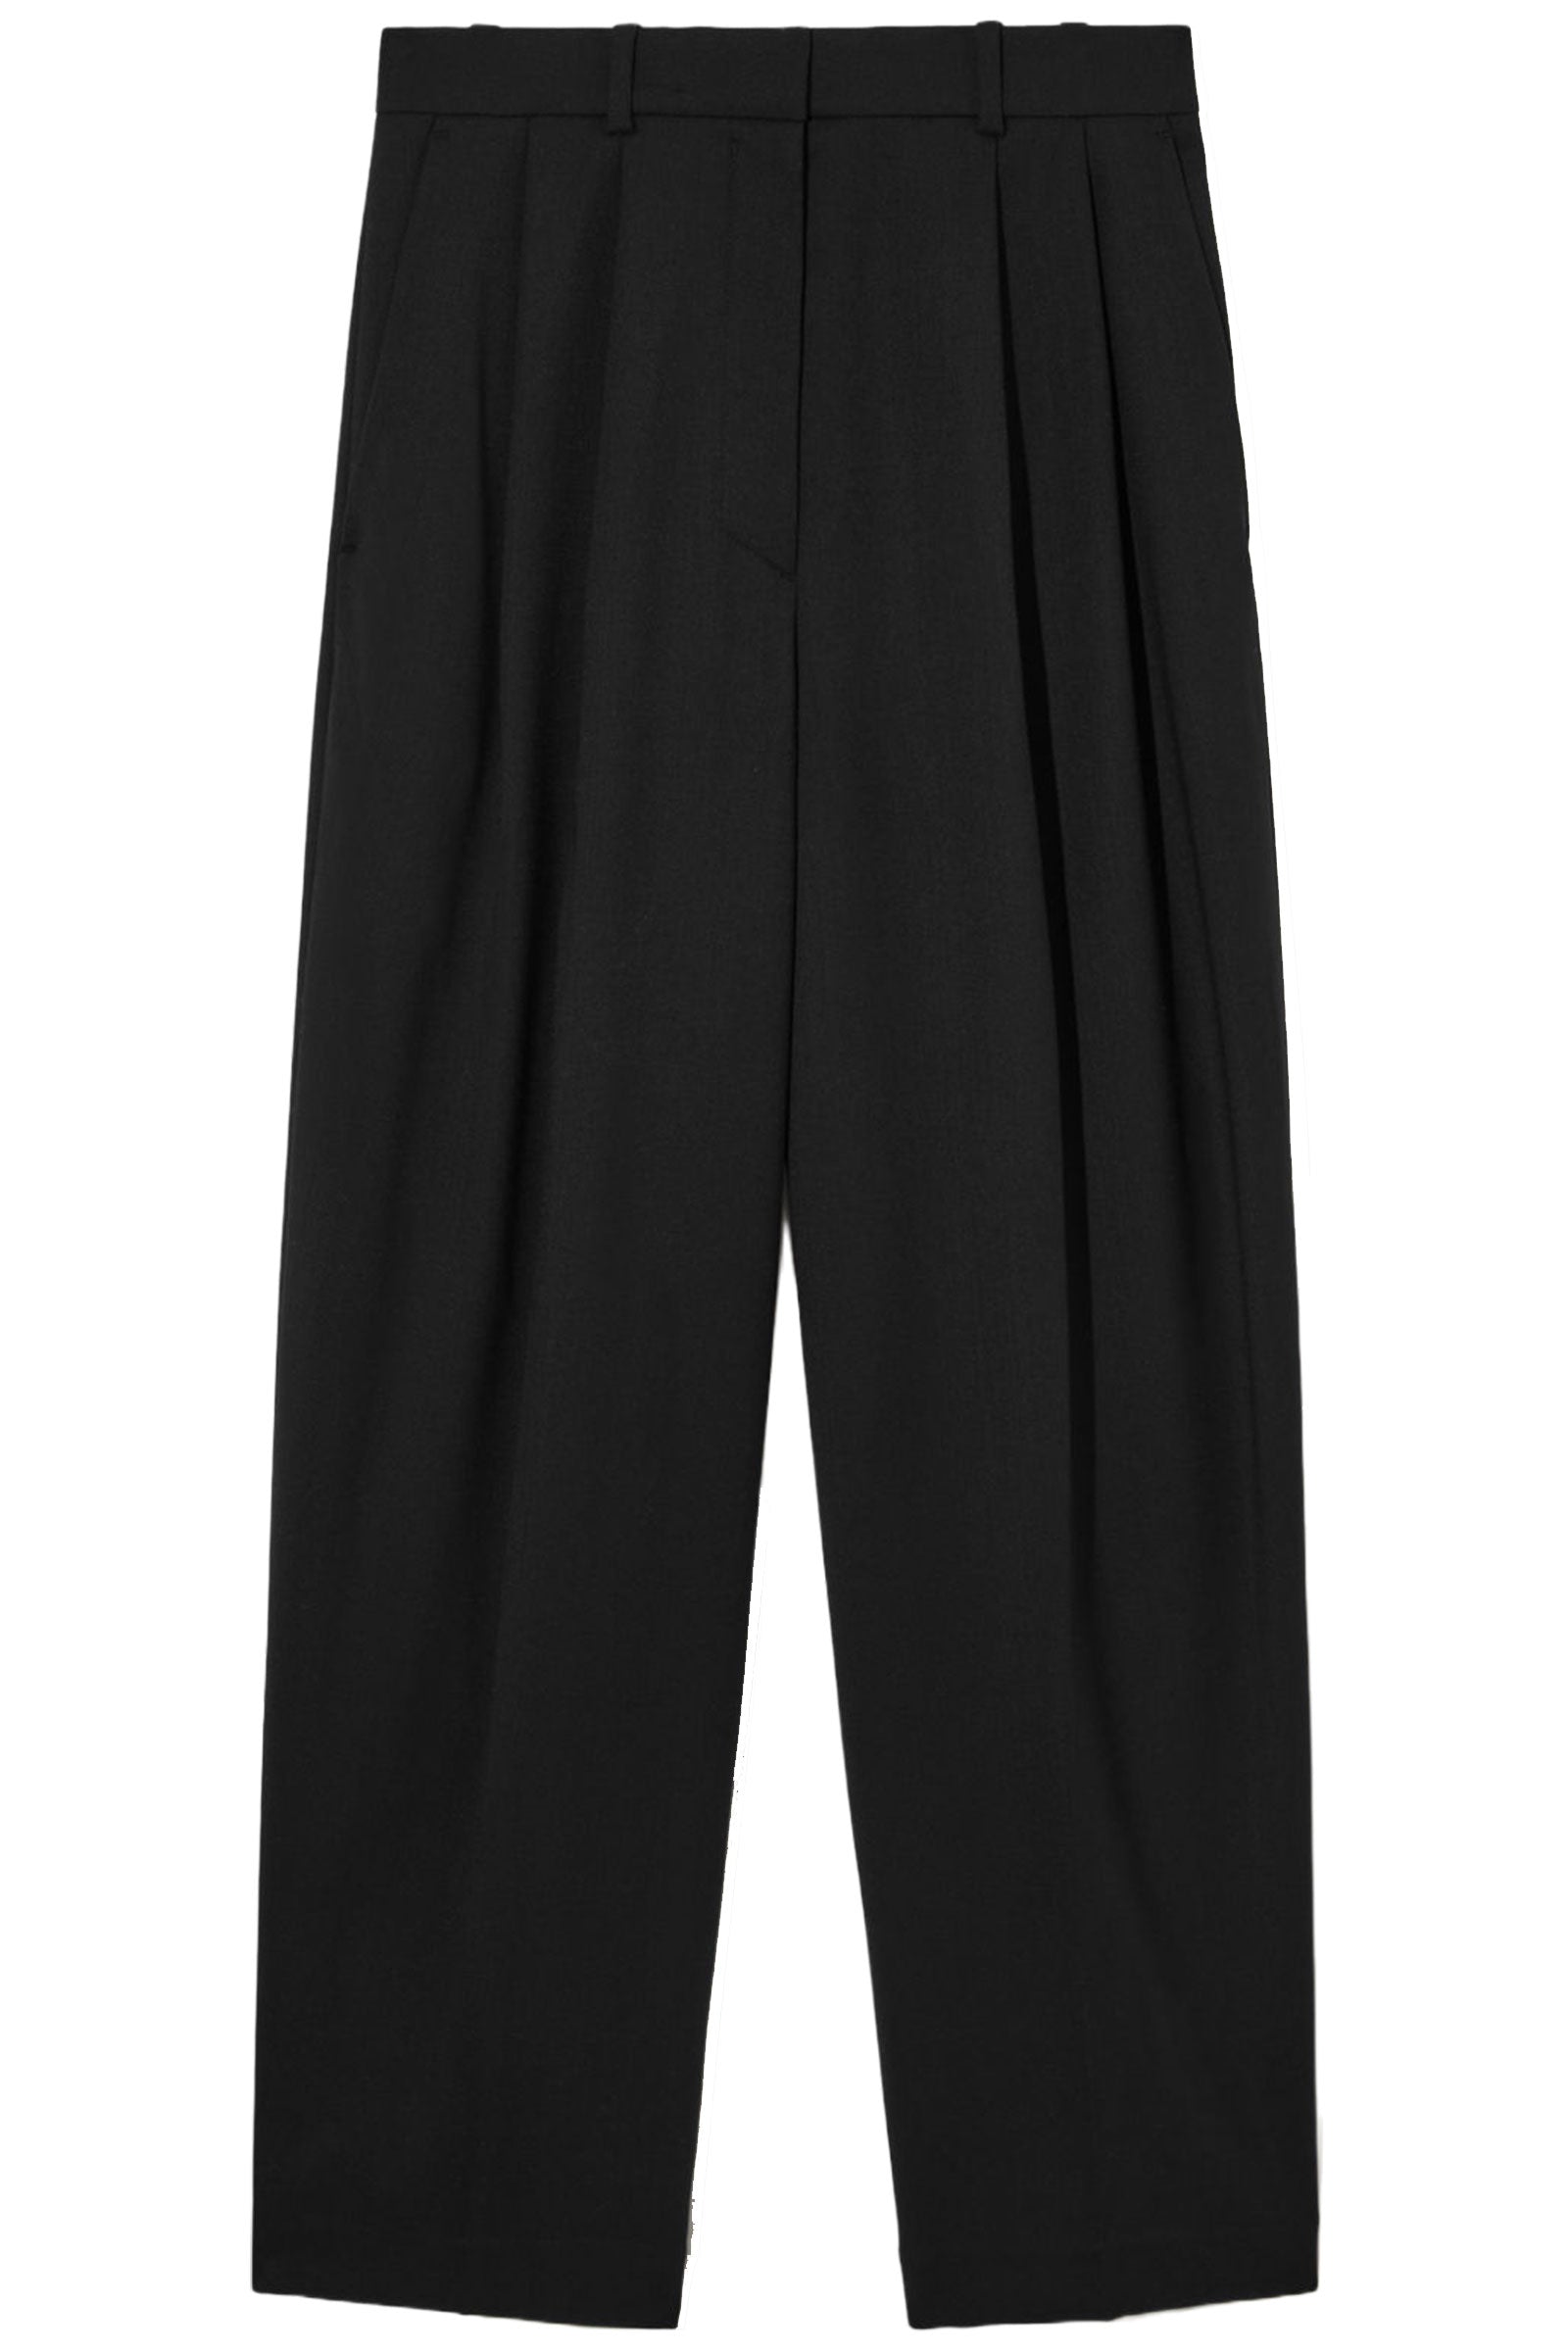 Buy COS Pleated Wide-Leg Chambray Trousers 2024 Online | ZALORA Singapore